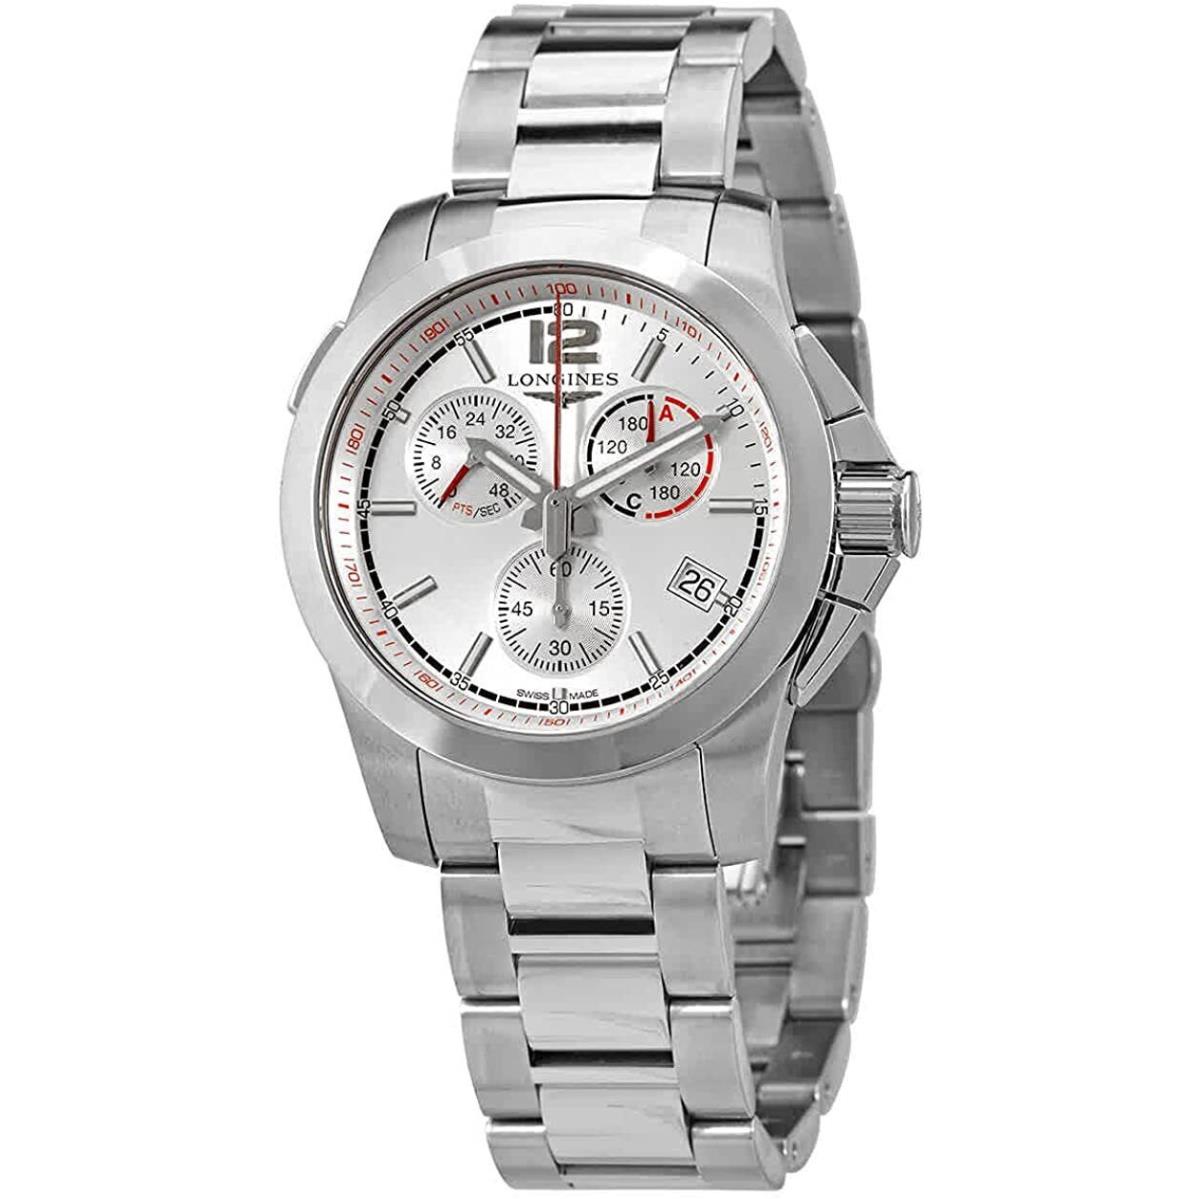 Longines Conquest Chronograph Jumping 41 Stainless Steel Mens Watch L37014766